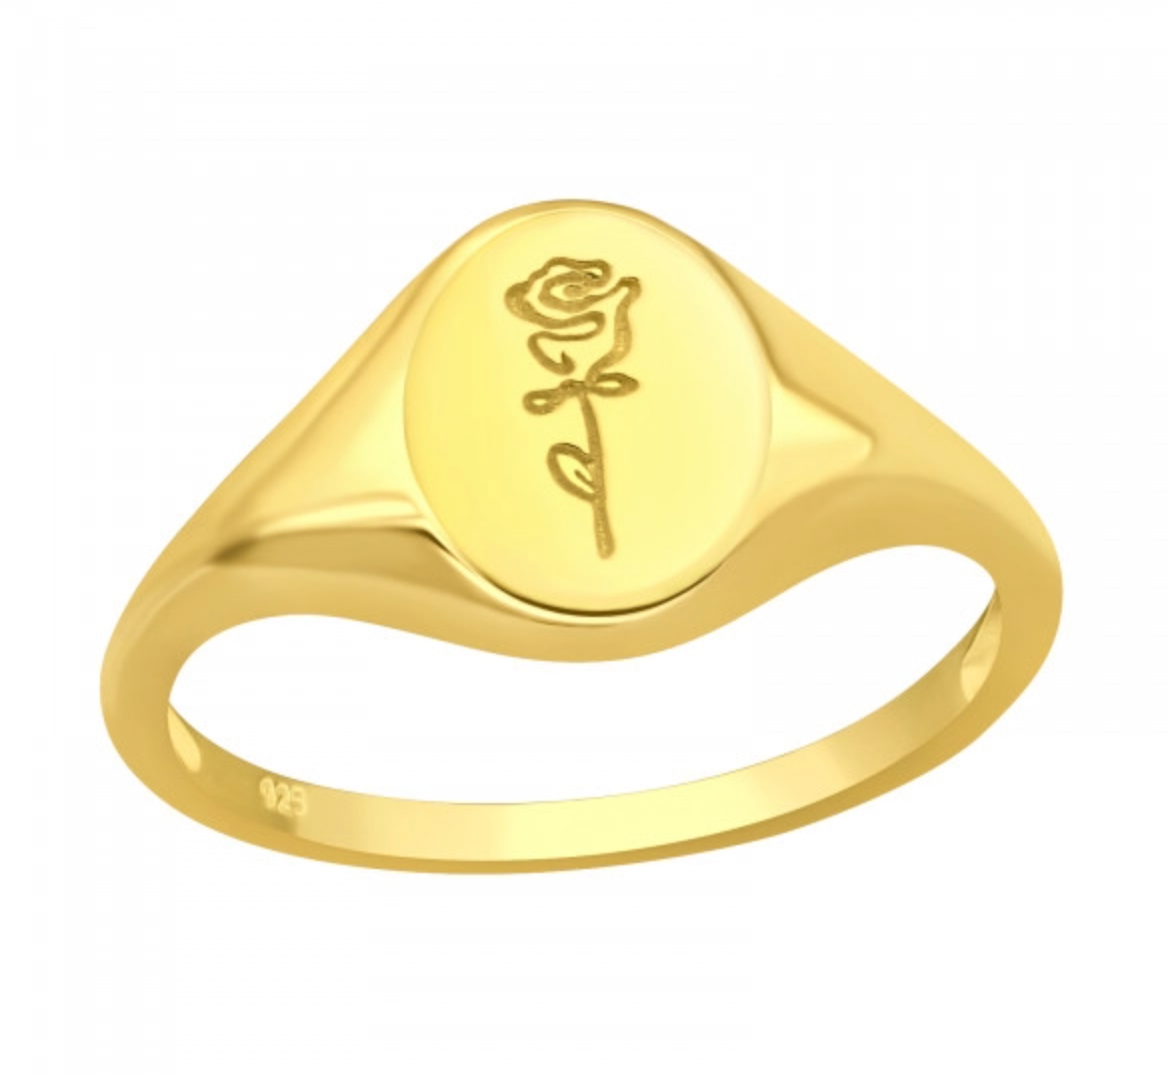 Rose Signet Ring - Yellow Gold Plated